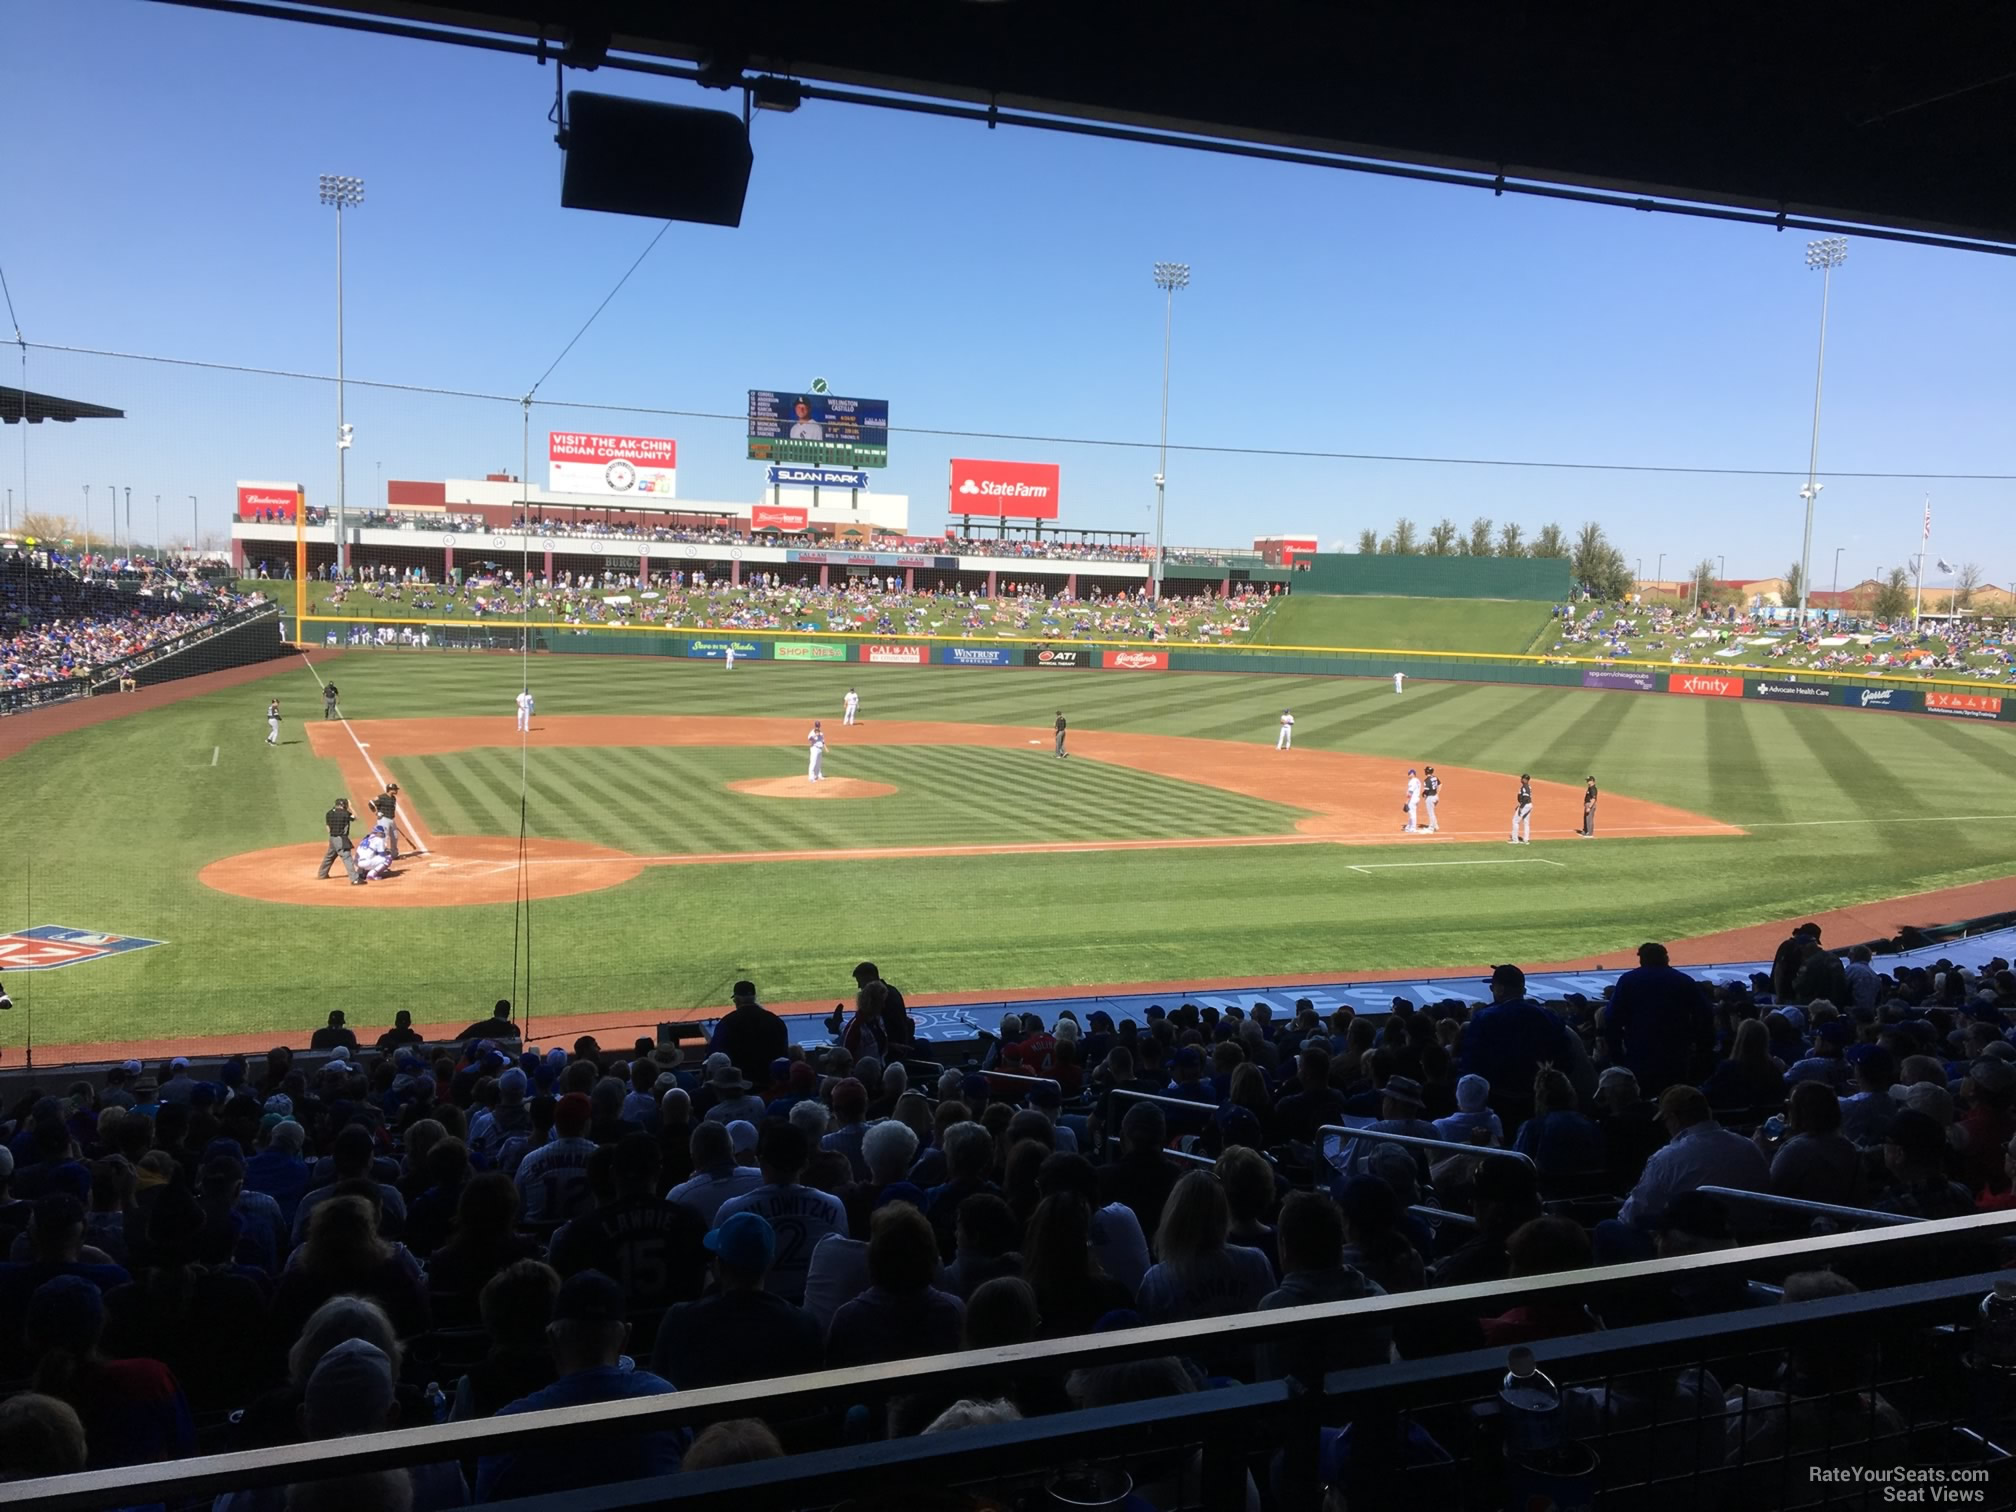 section 113, row 24 seat view  - sloan park